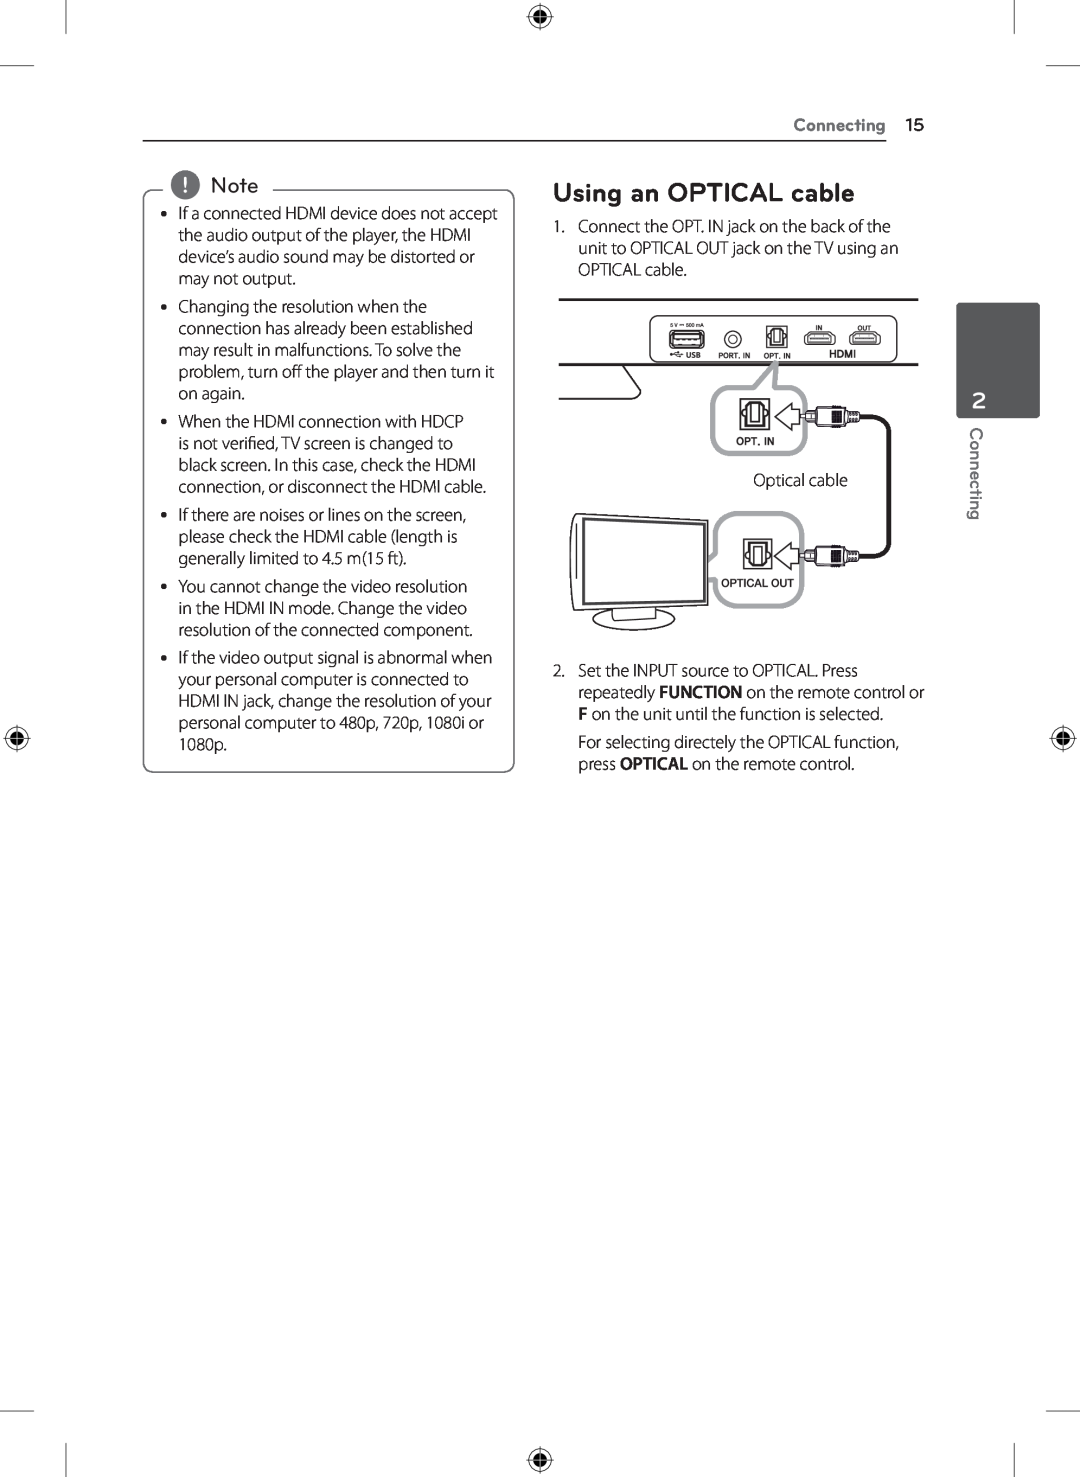 LG Electronics NB4530A, S43A1-D owner manual Using an OPTICAL cable, Connecting 